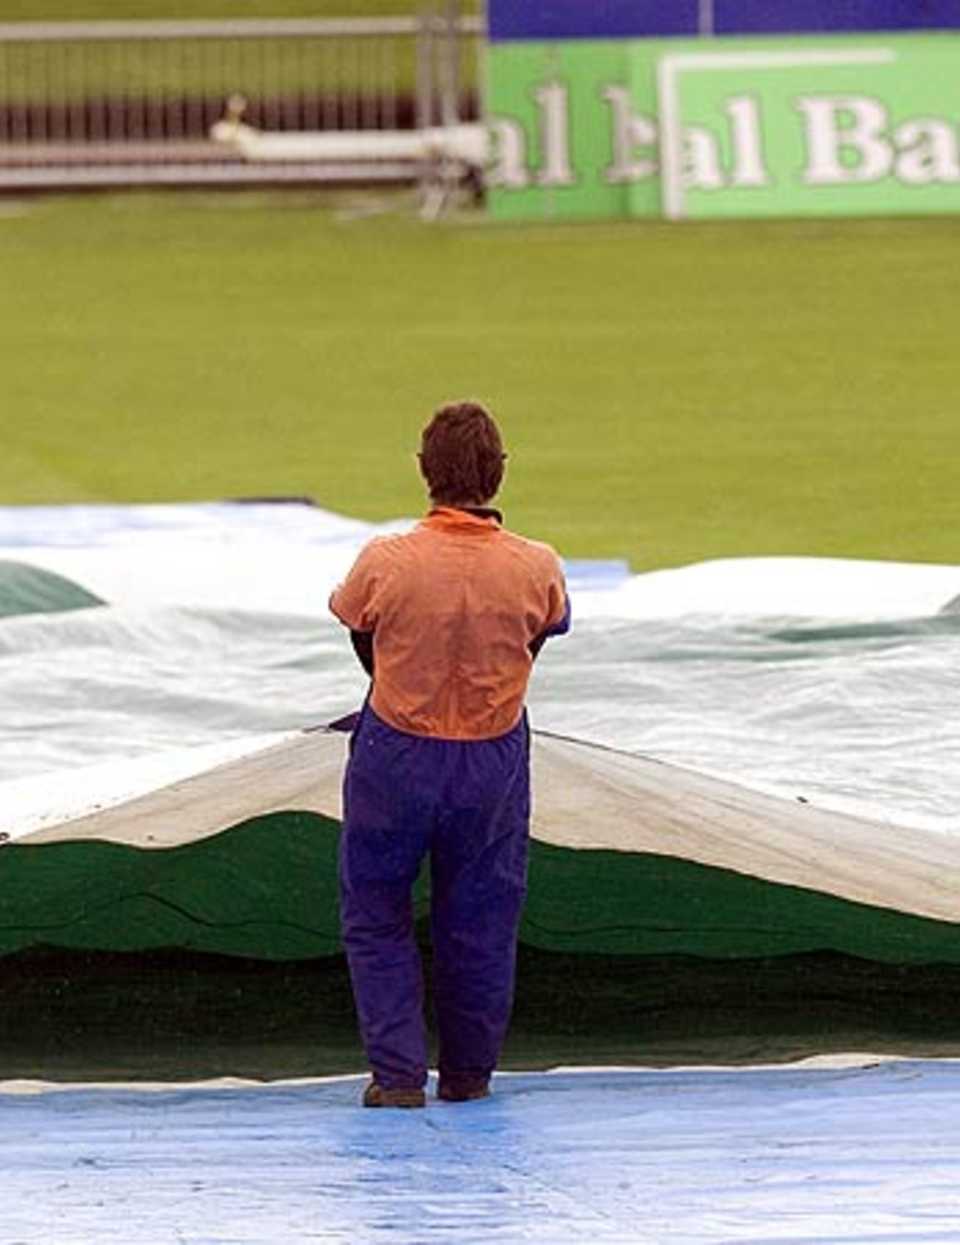 A groundsman brings on the covers at Napier